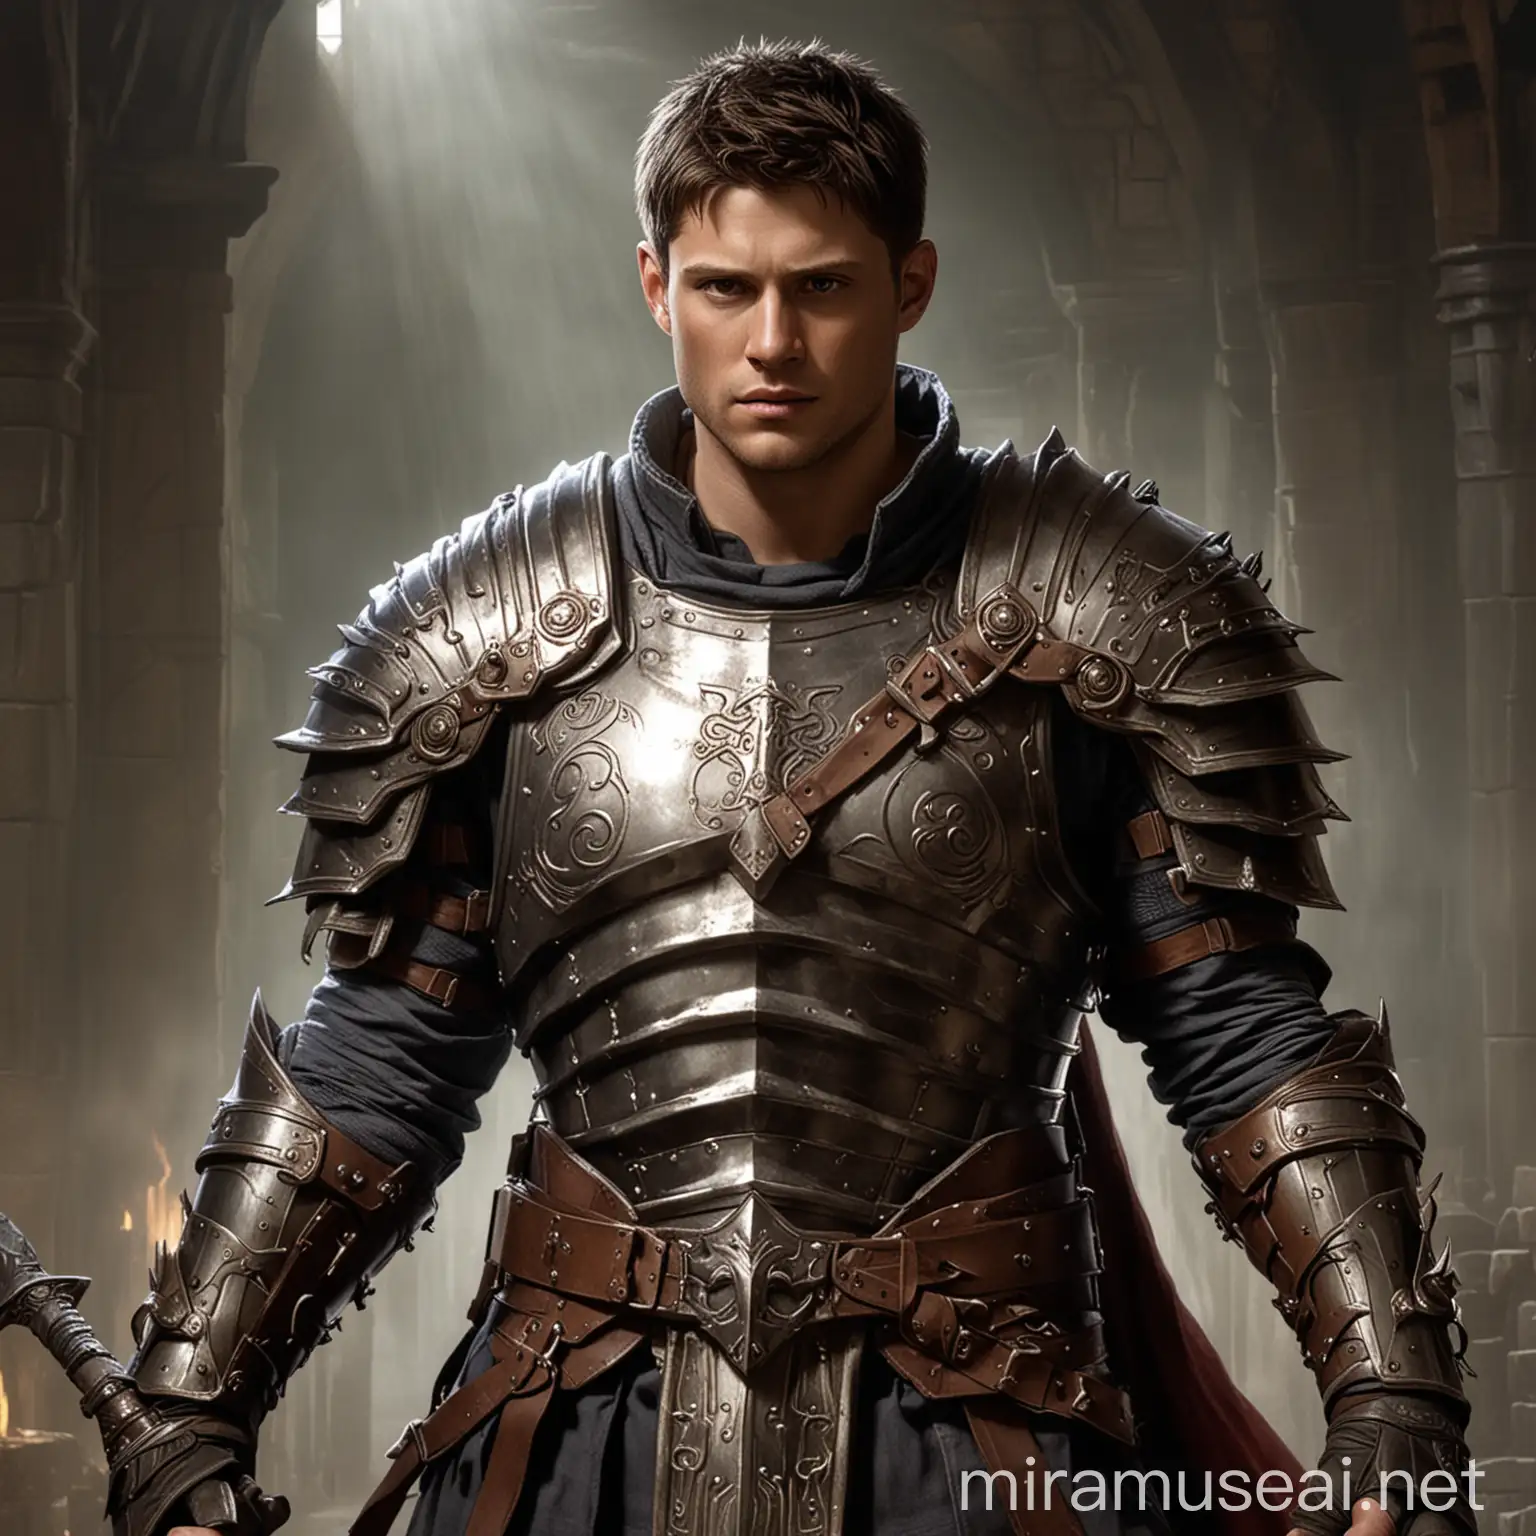 Dean Winchester as a Dungeons Dragons Oath of Vengeance Paladin with Greatsword